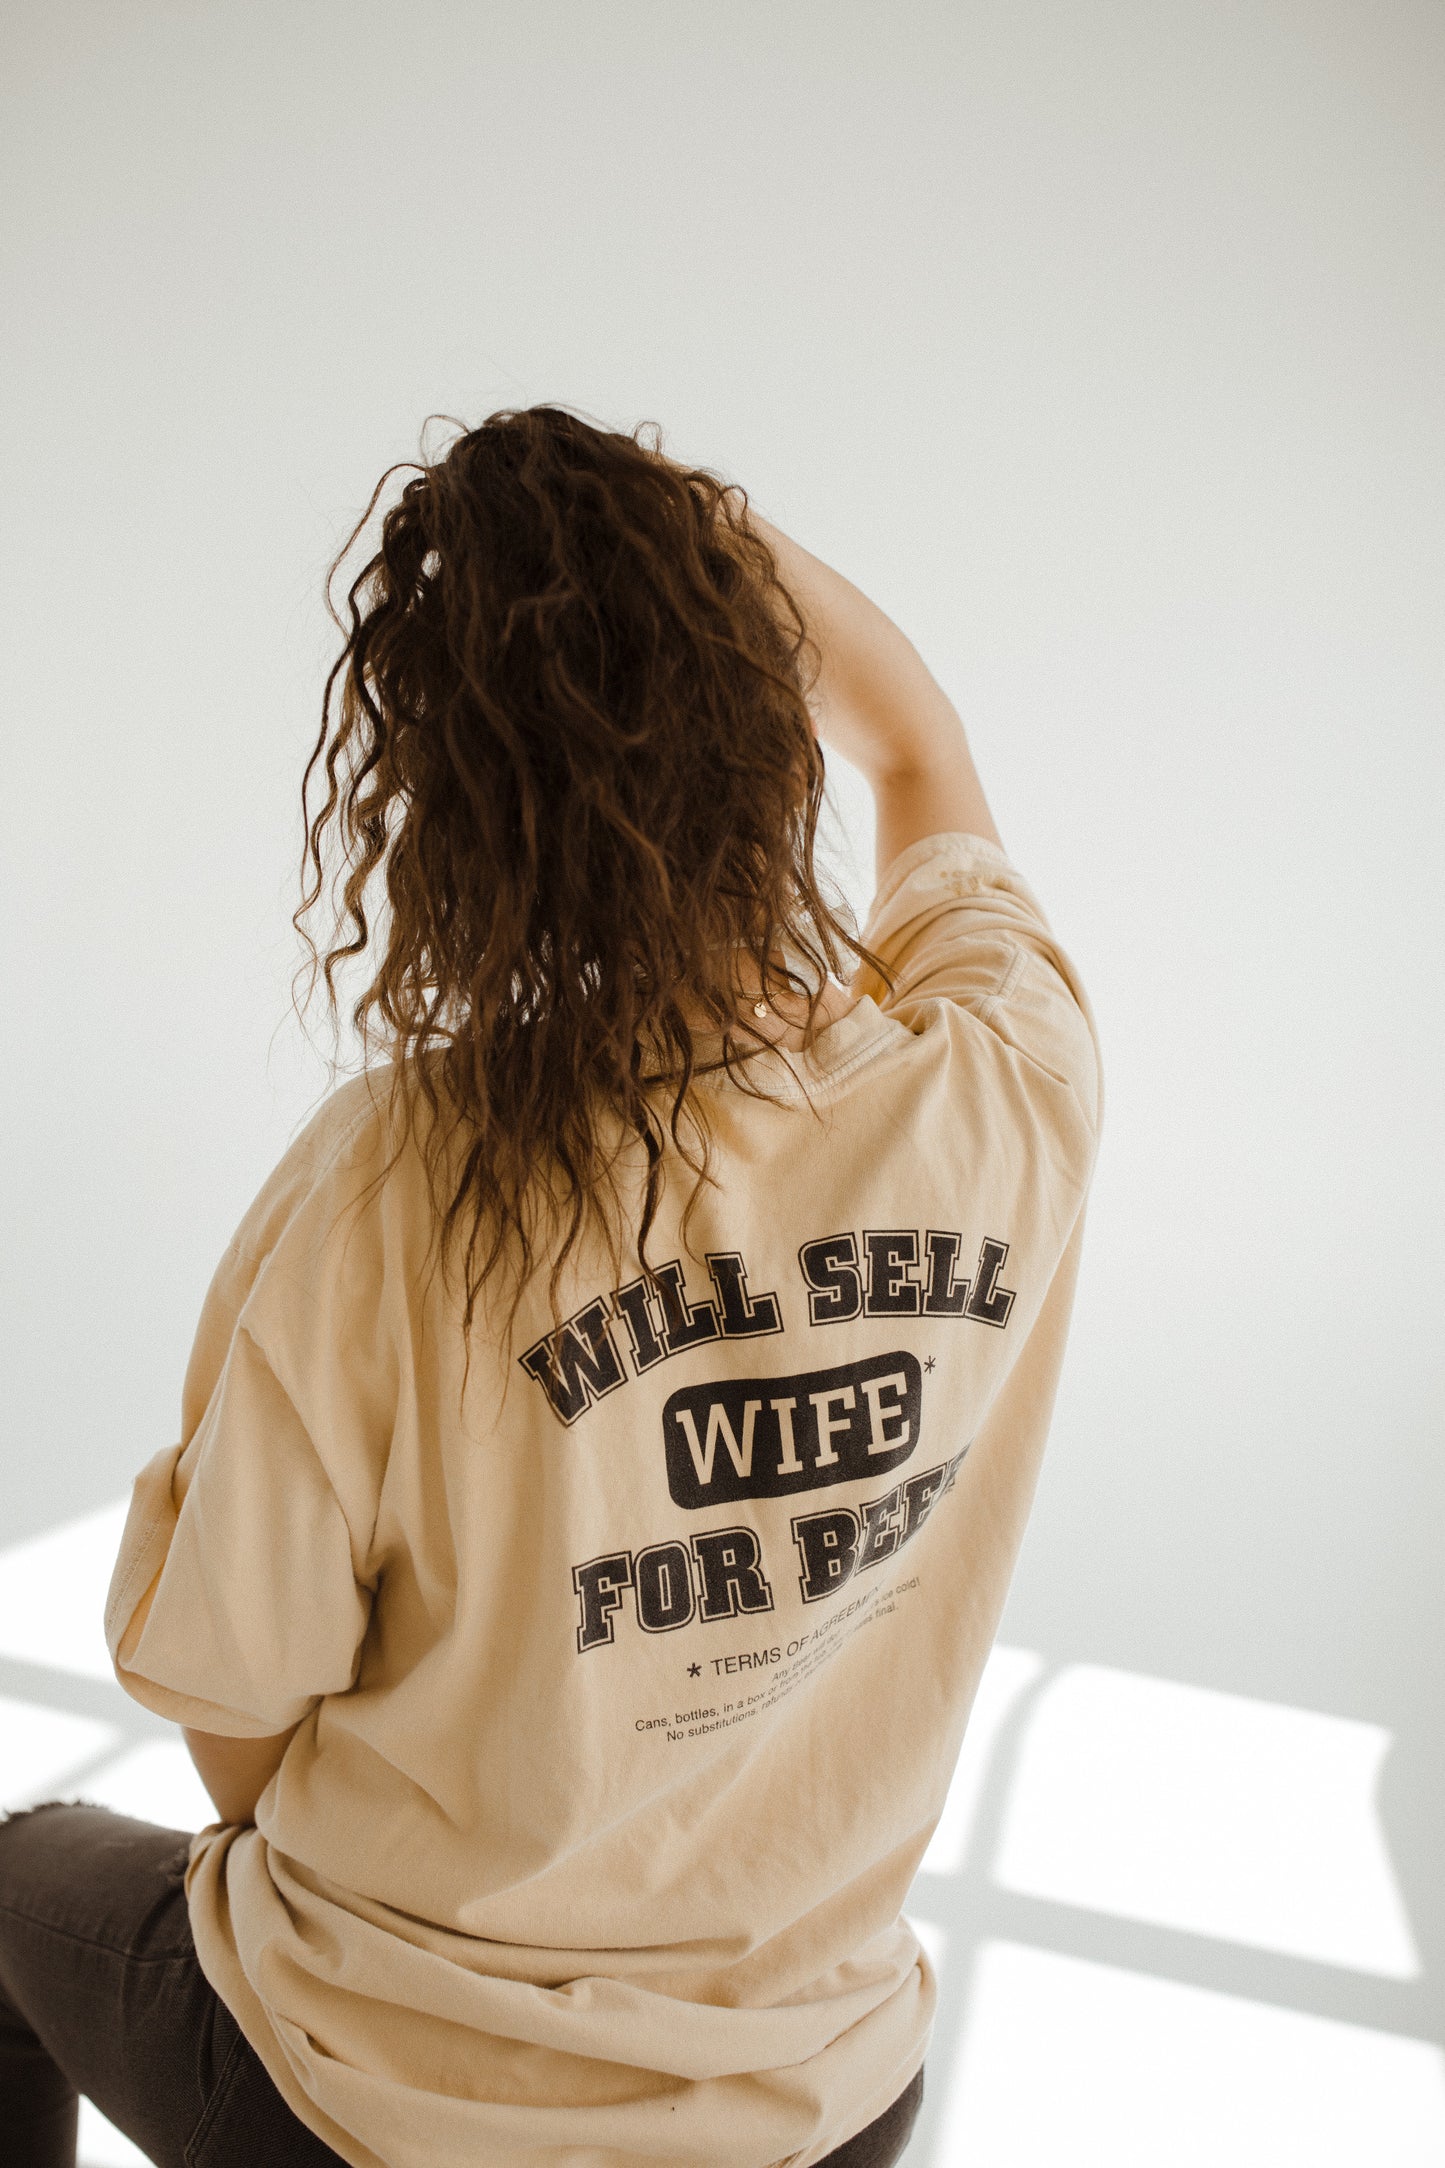 Will Sell Wife For Beer Tee: A Vibe